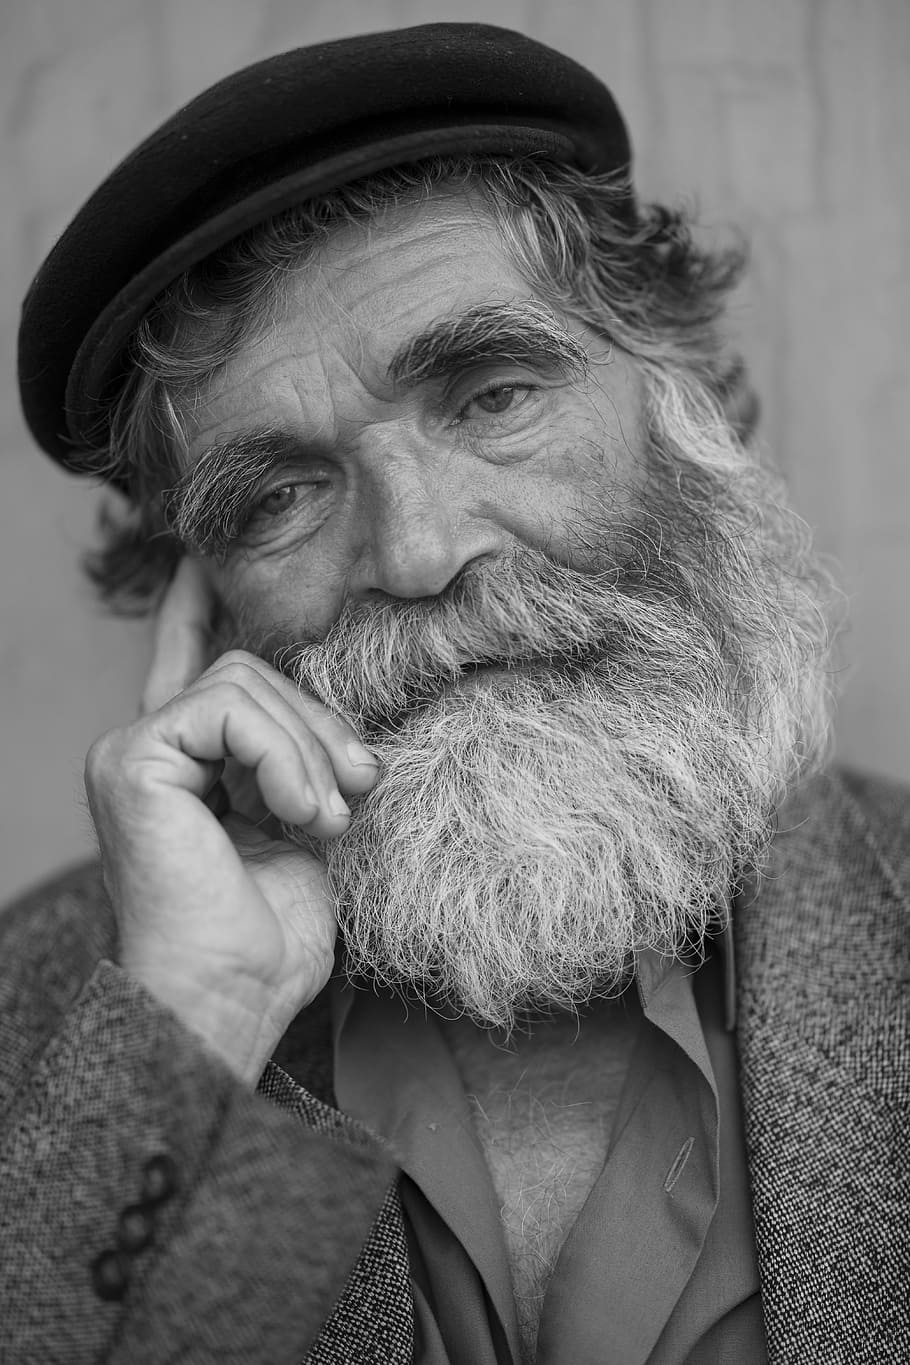 grayscale photography, holding, right cheek, Old, Grandfather, Man, Male, Beard, old man, old grandfather